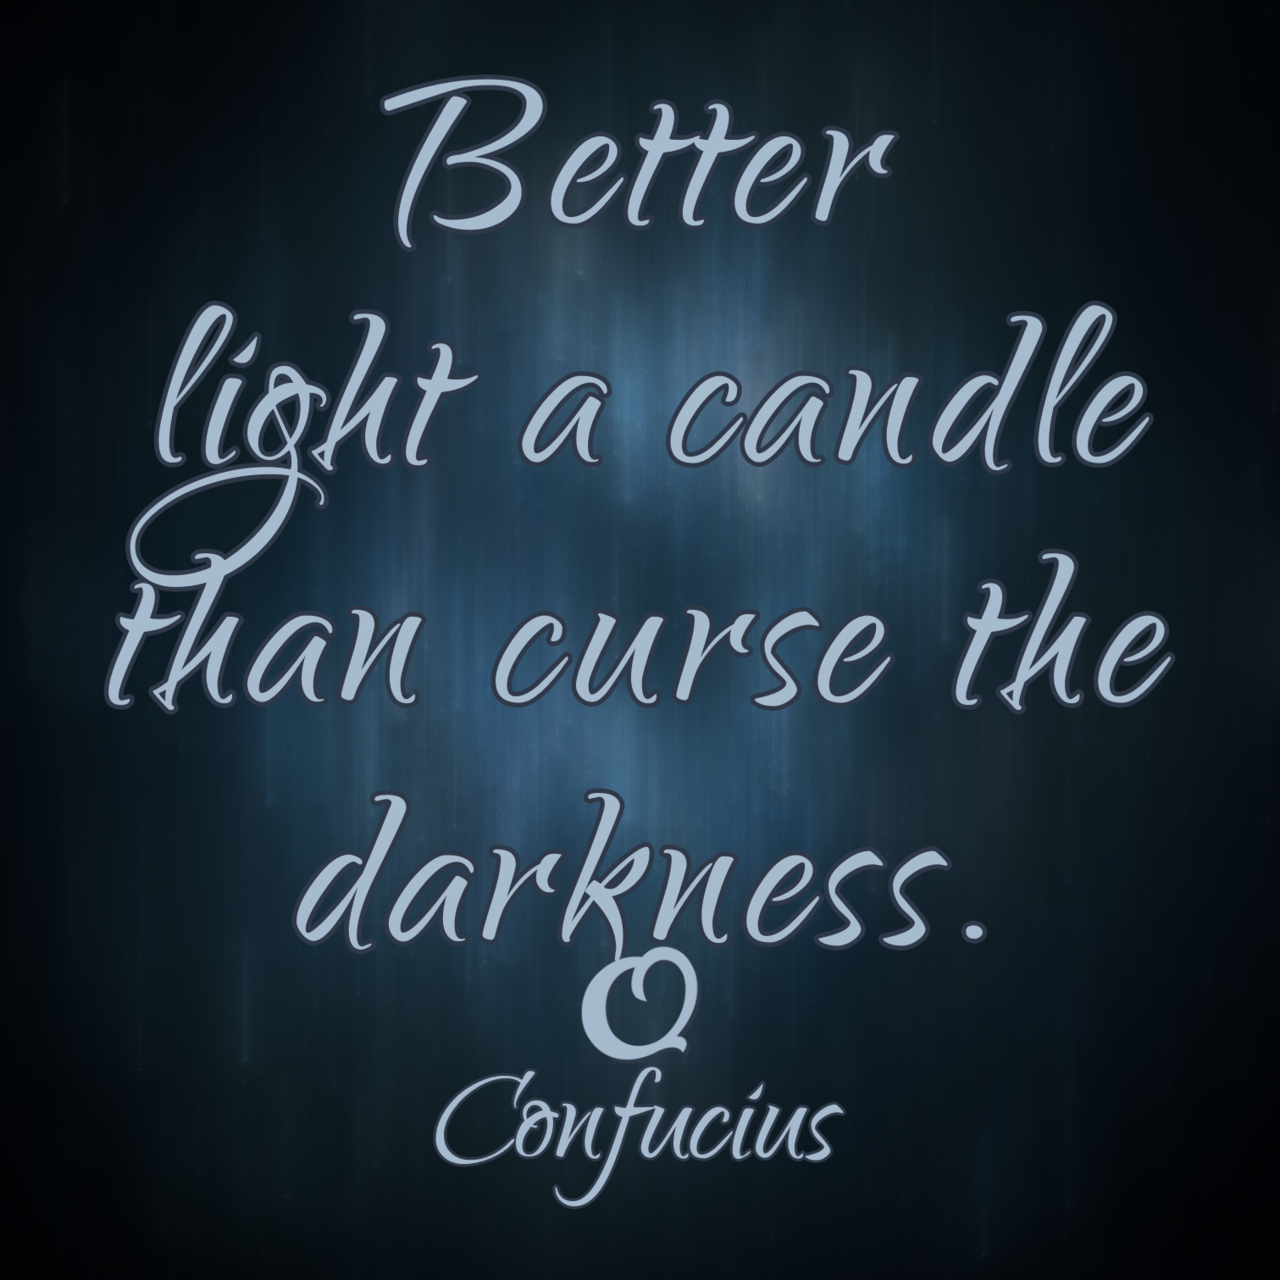 Confucius “Better light a candle than curse the darkness.”